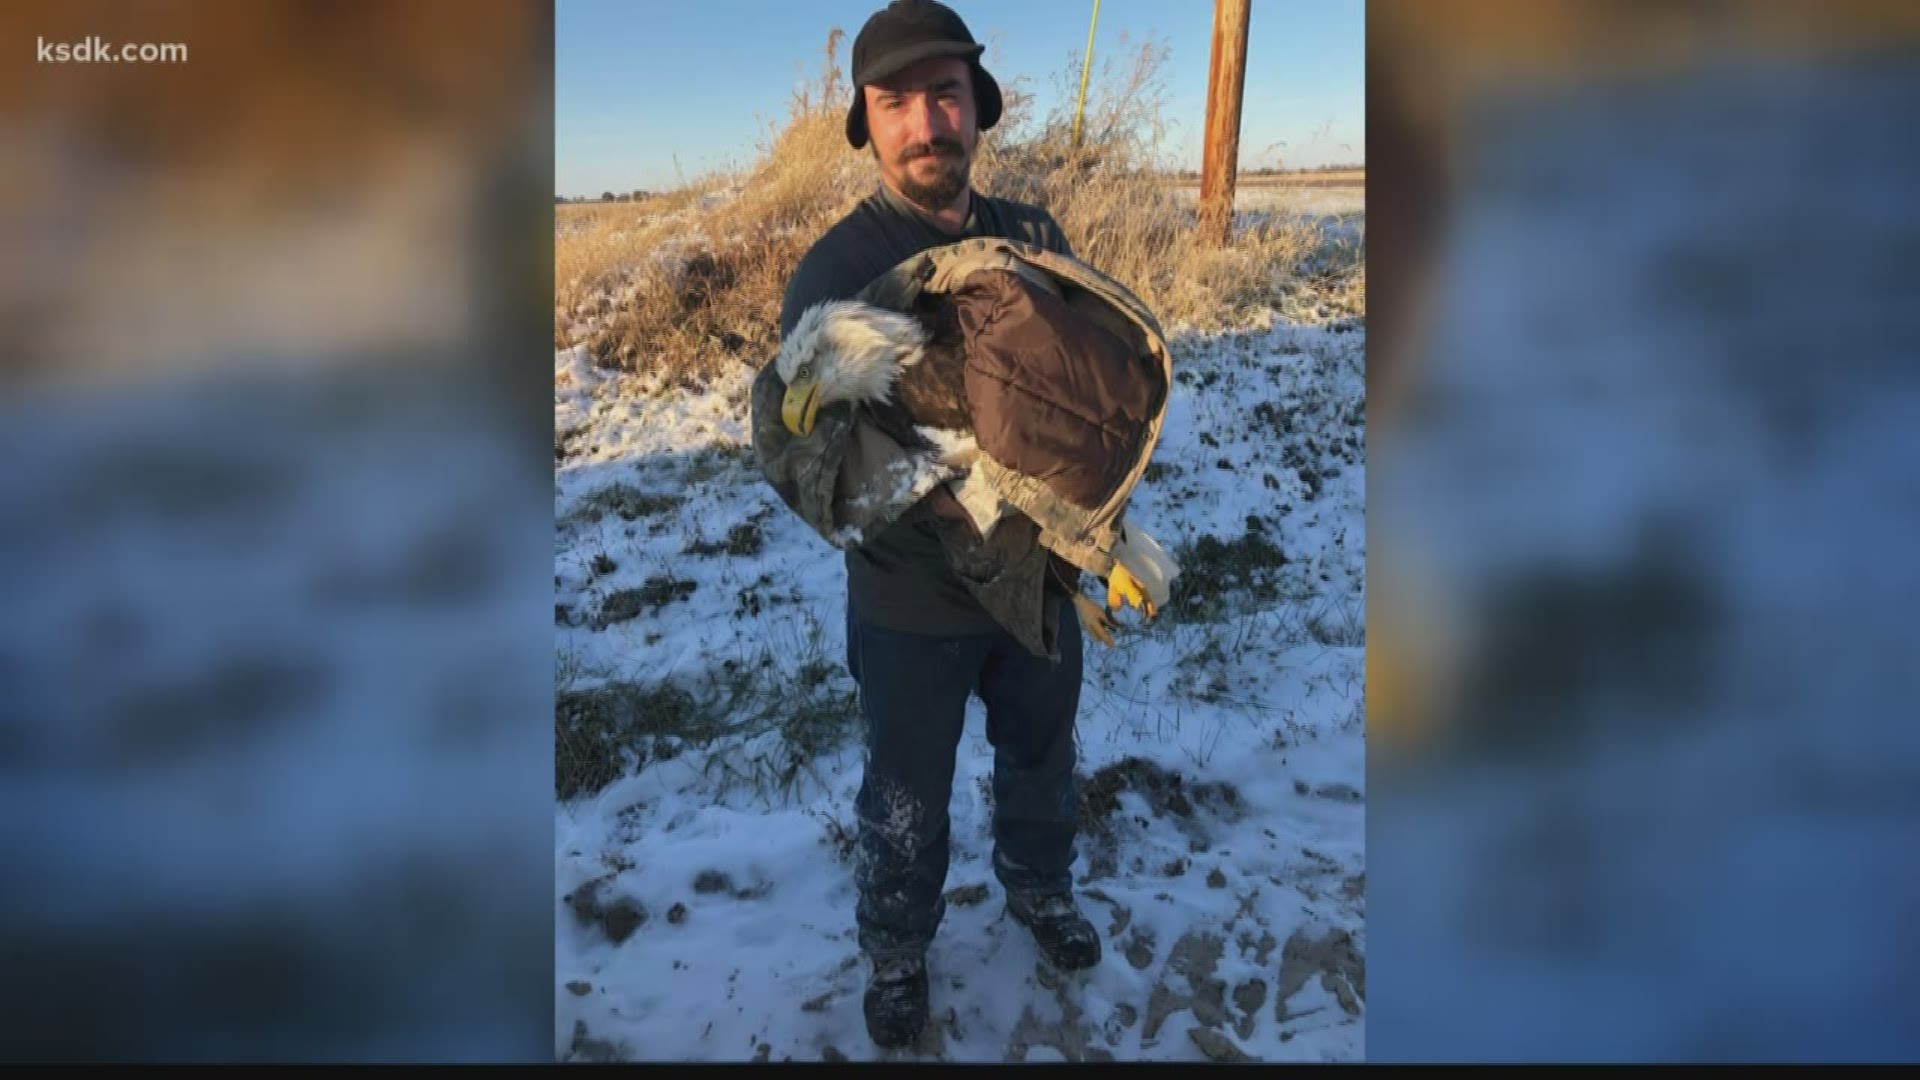 Two local men did find a Bald Eagle in need of help and took the situation into their own hands.